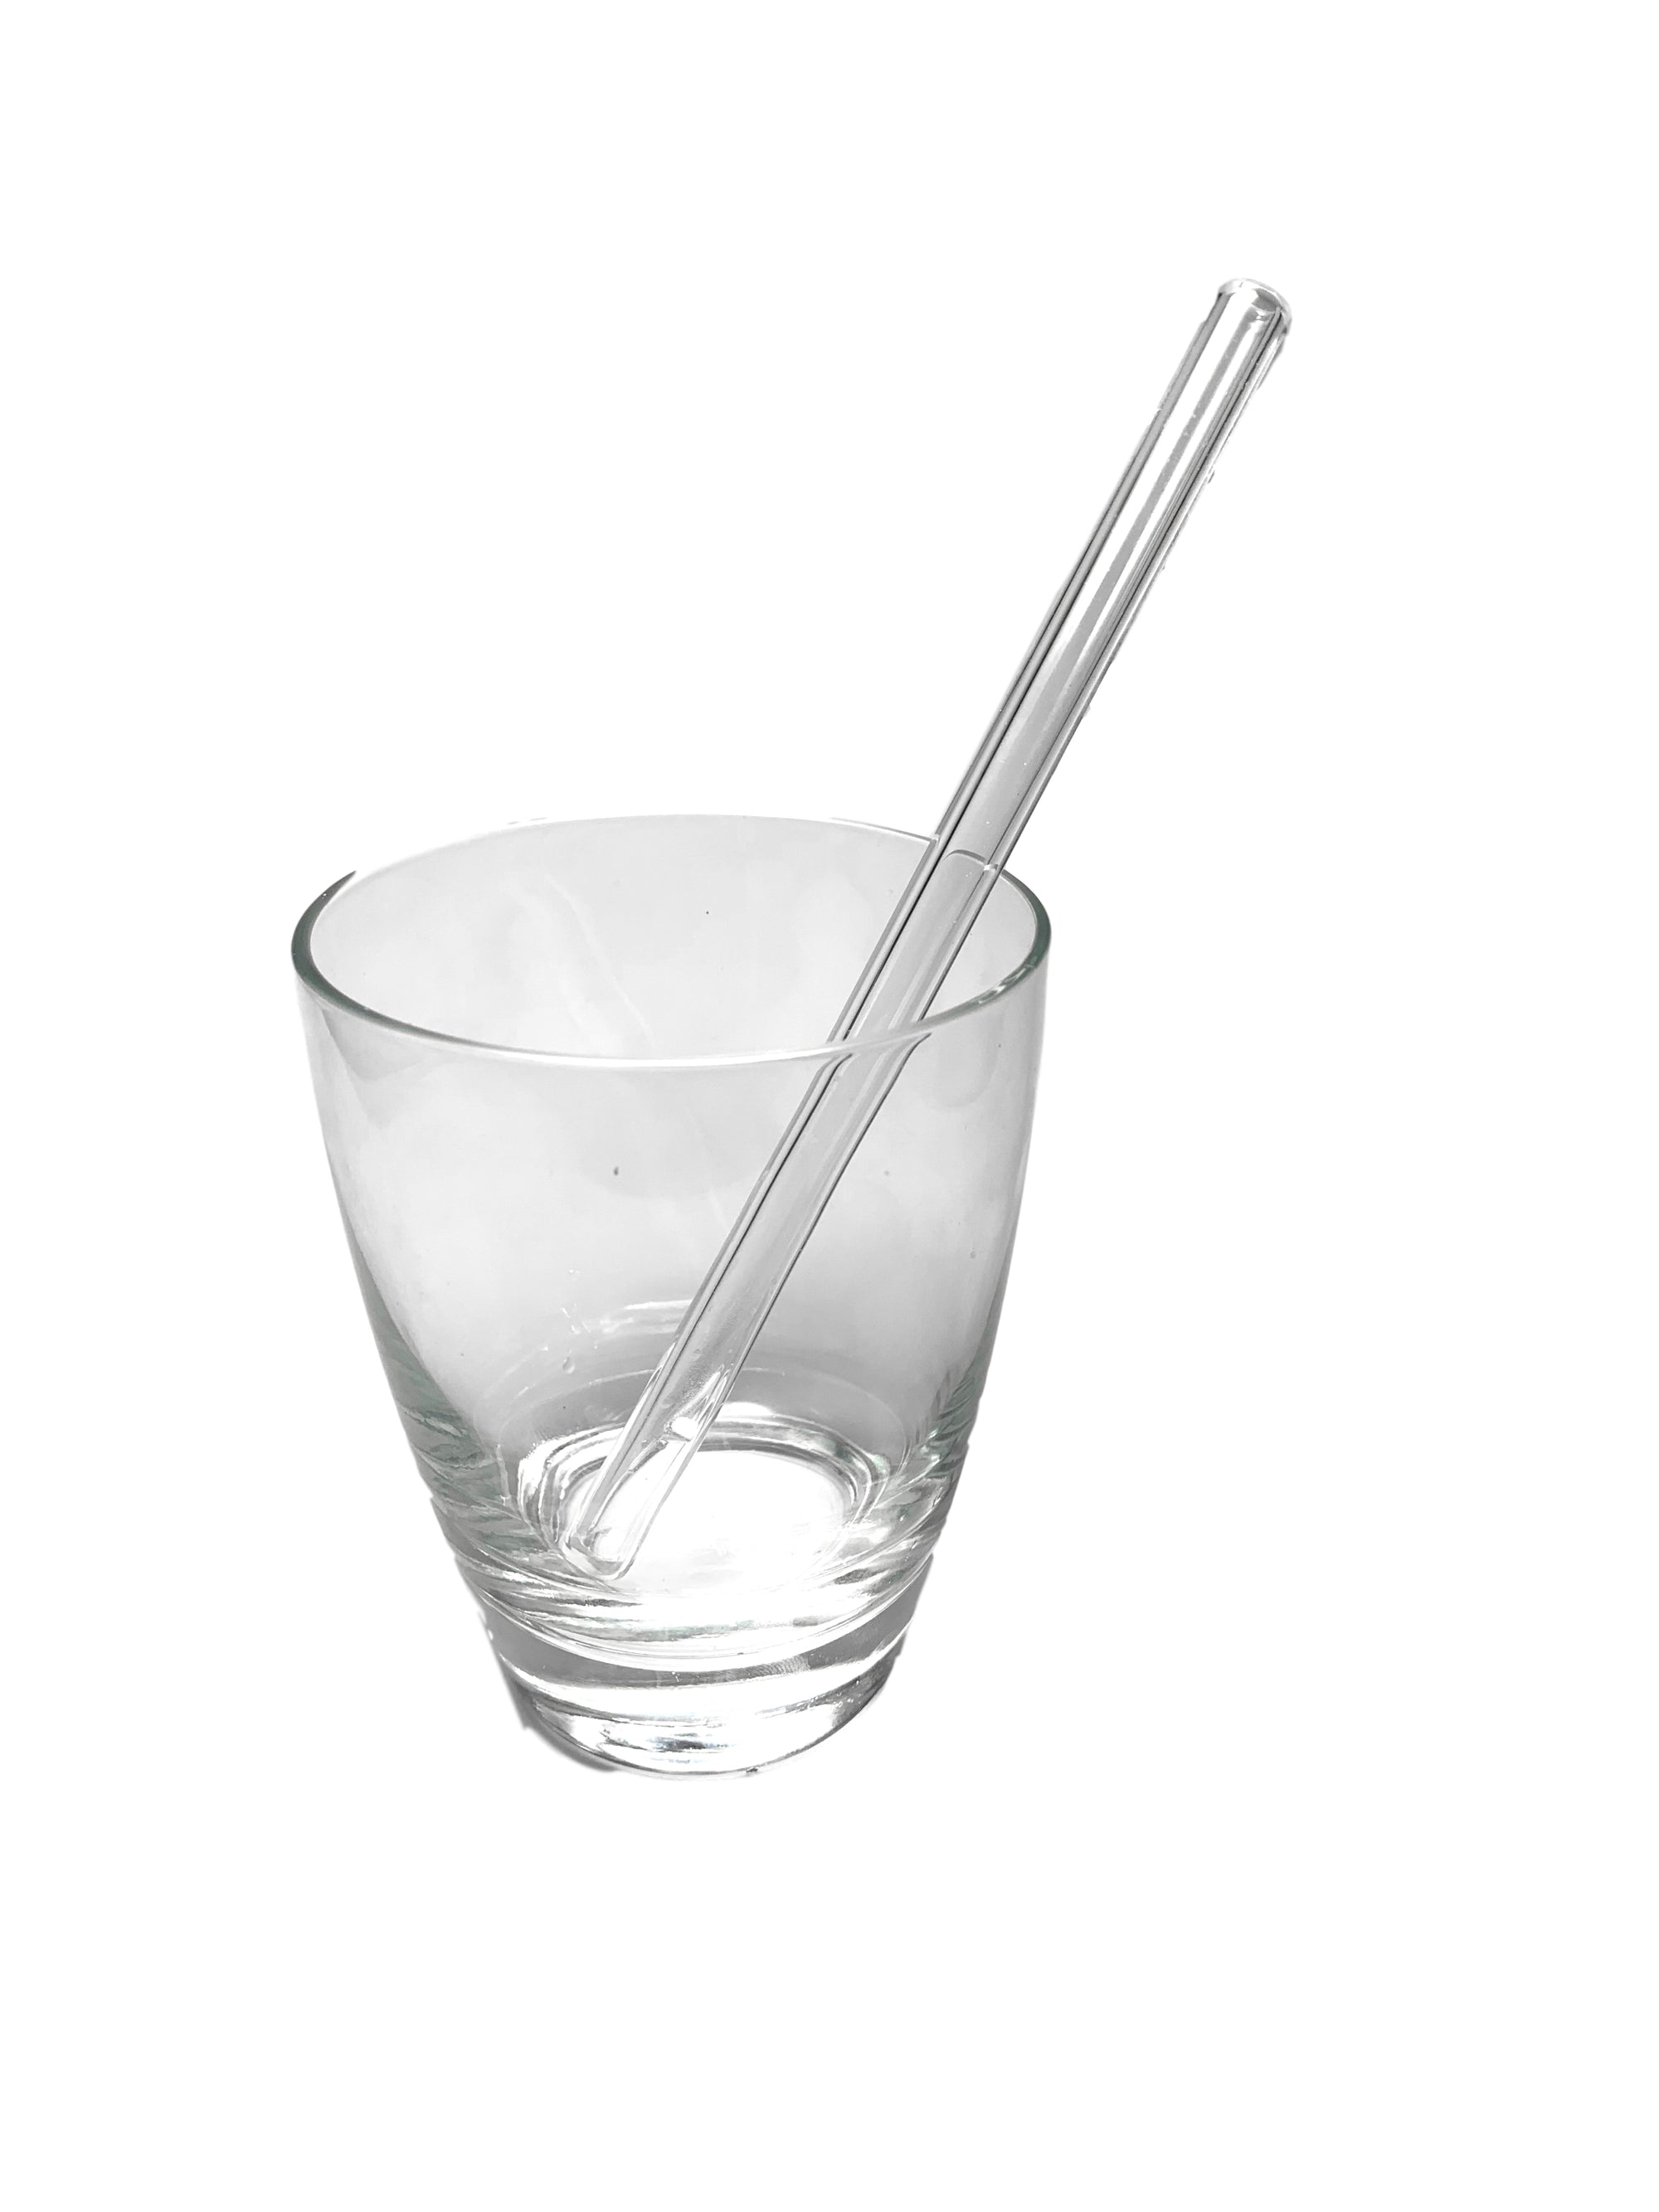 Which Reusable Straw is Best?